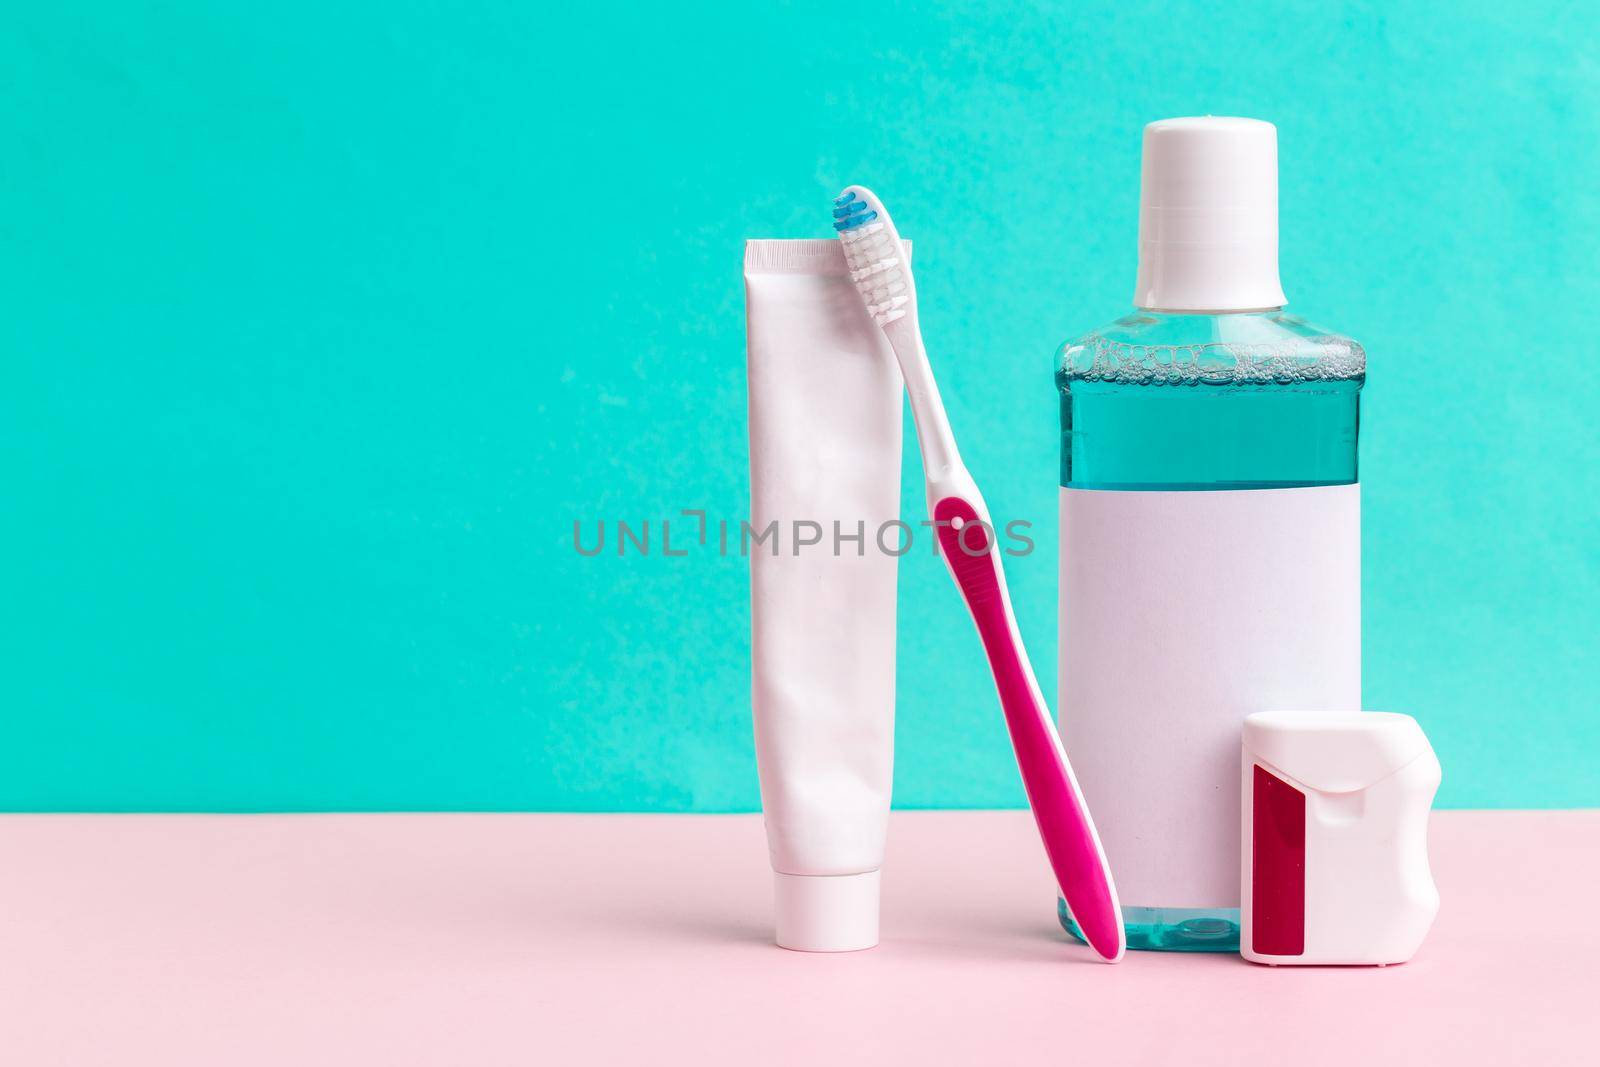 mouthwash and toothbrush for healthy care oral cavity by Fabrikasimf